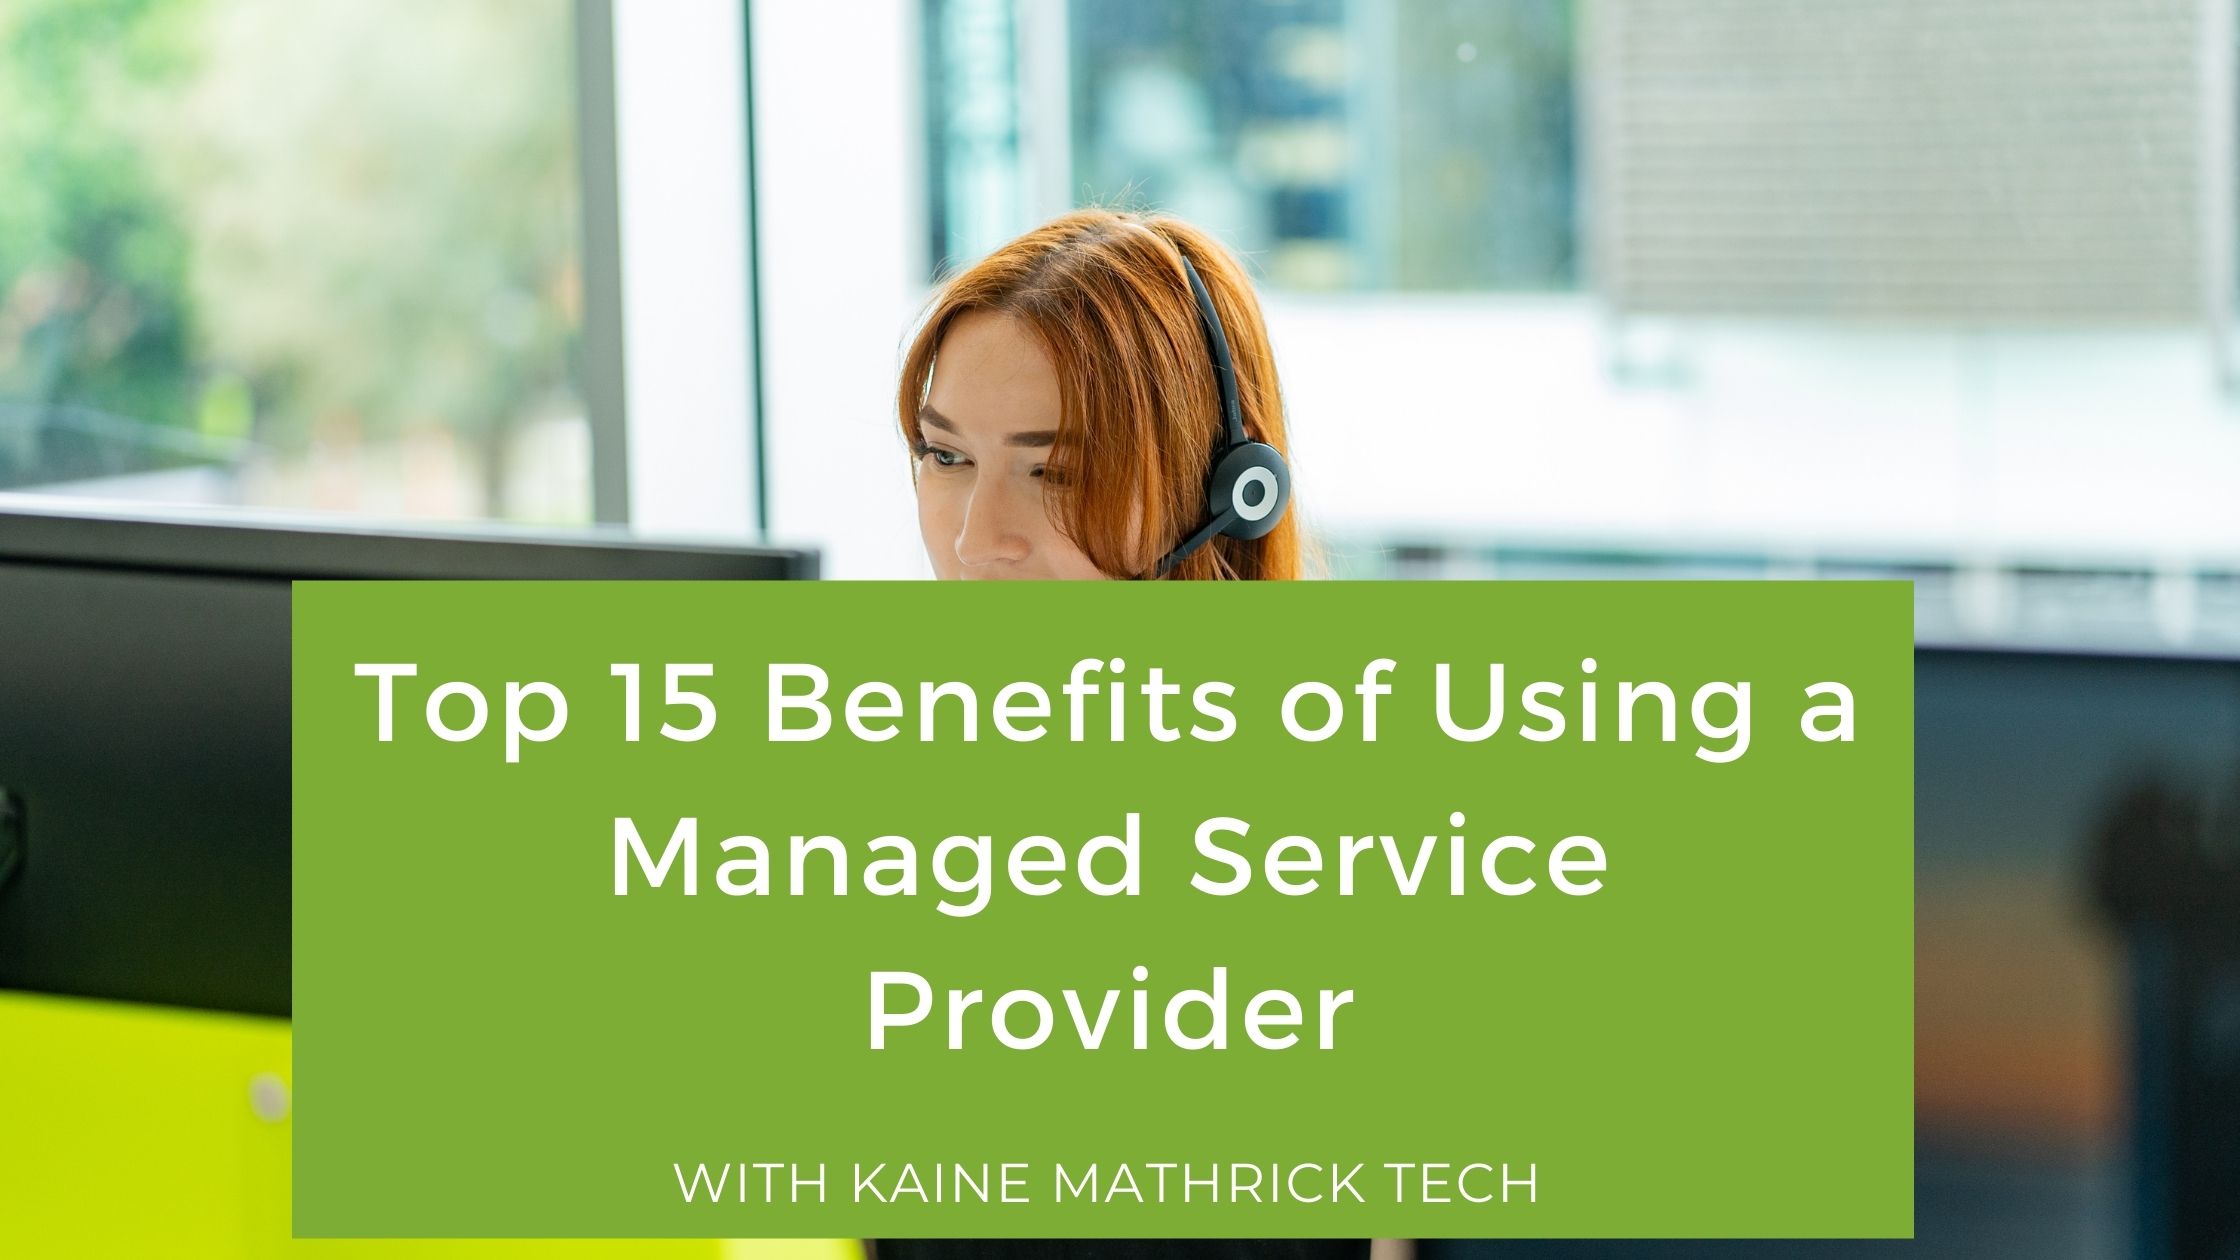 Top 15 Benefits of Using a Managed Service Provider